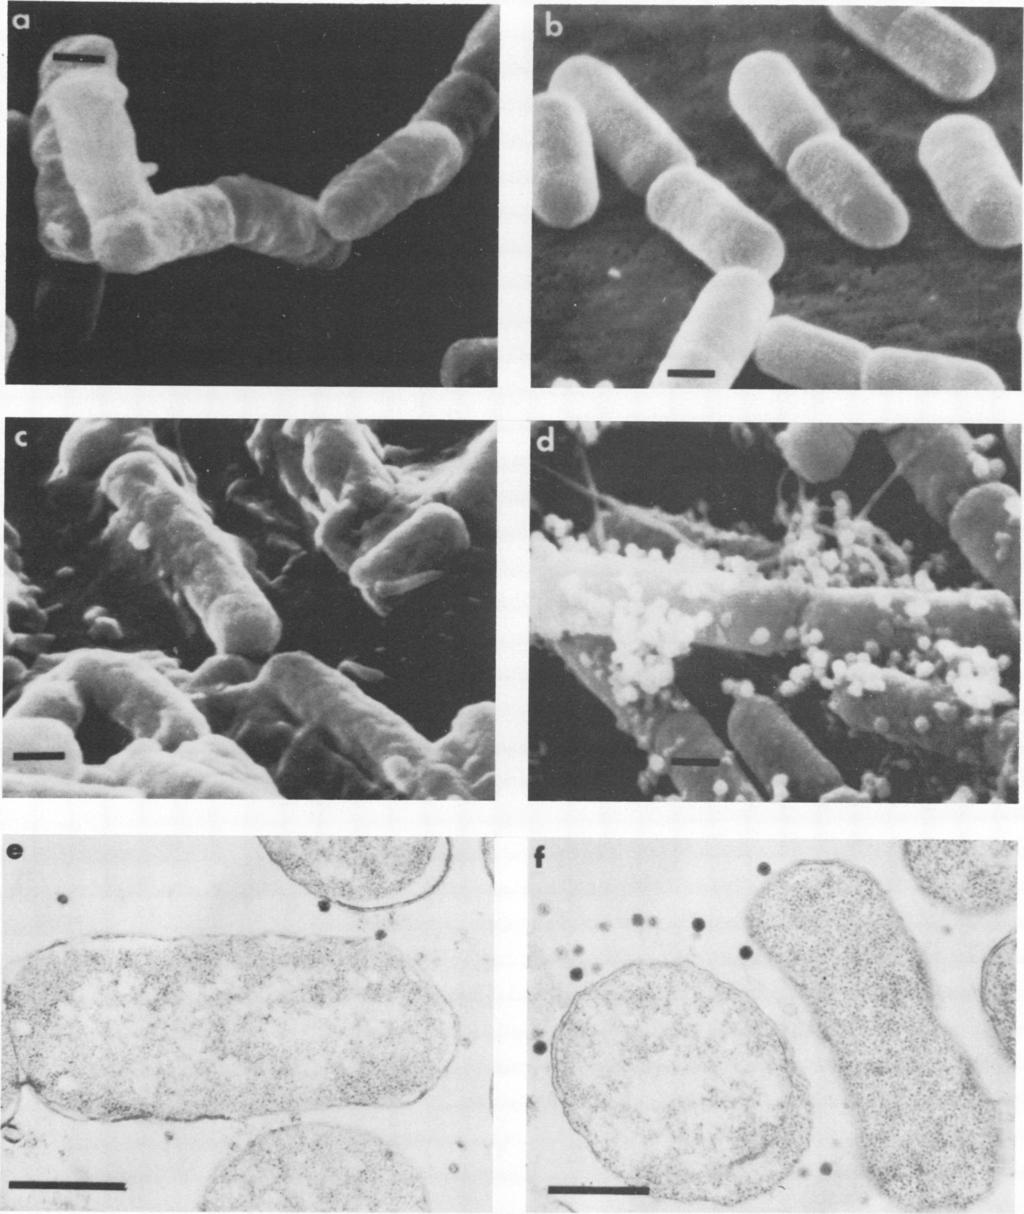 VOL. 15, 1975 SEM VISUALIZATION OF PHAGE ADSORPTION 1501 Downloaded from http://jvi.asm.org/ FIG. 2. Comparison of glutaraldehyde fixation to glutaraldehyde, post-osmium fixation by SEM and TEM.